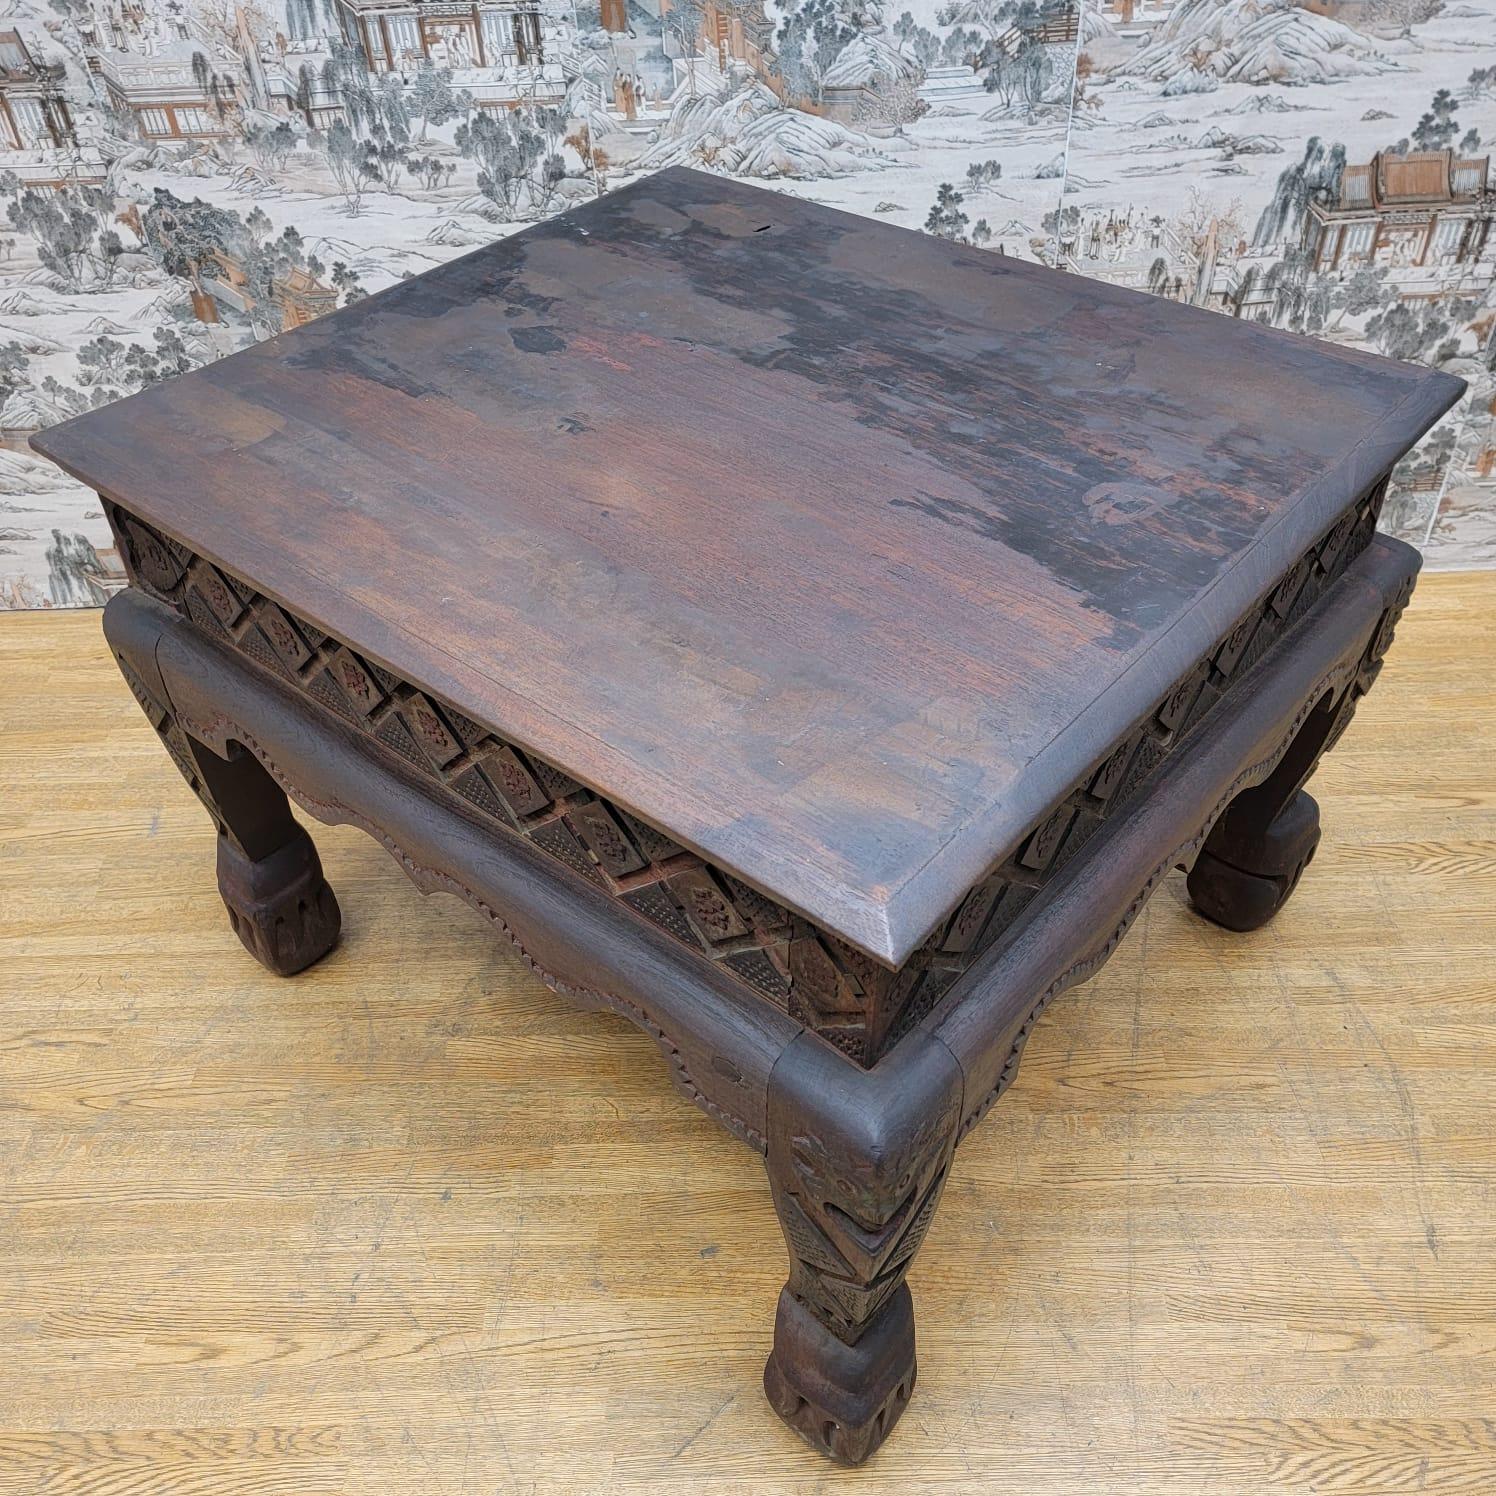 Antique East Indian Teak Wood Square Side Table with Carved Legs and Apron In Good Condition For Sale In Chicago, IL